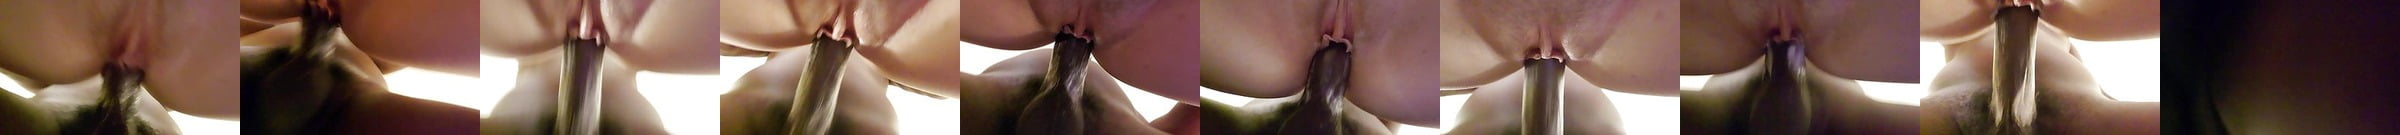 Huge Bbc Is Pulsating Cum In Pussy Free Porn 61 Xhamster Xhamster